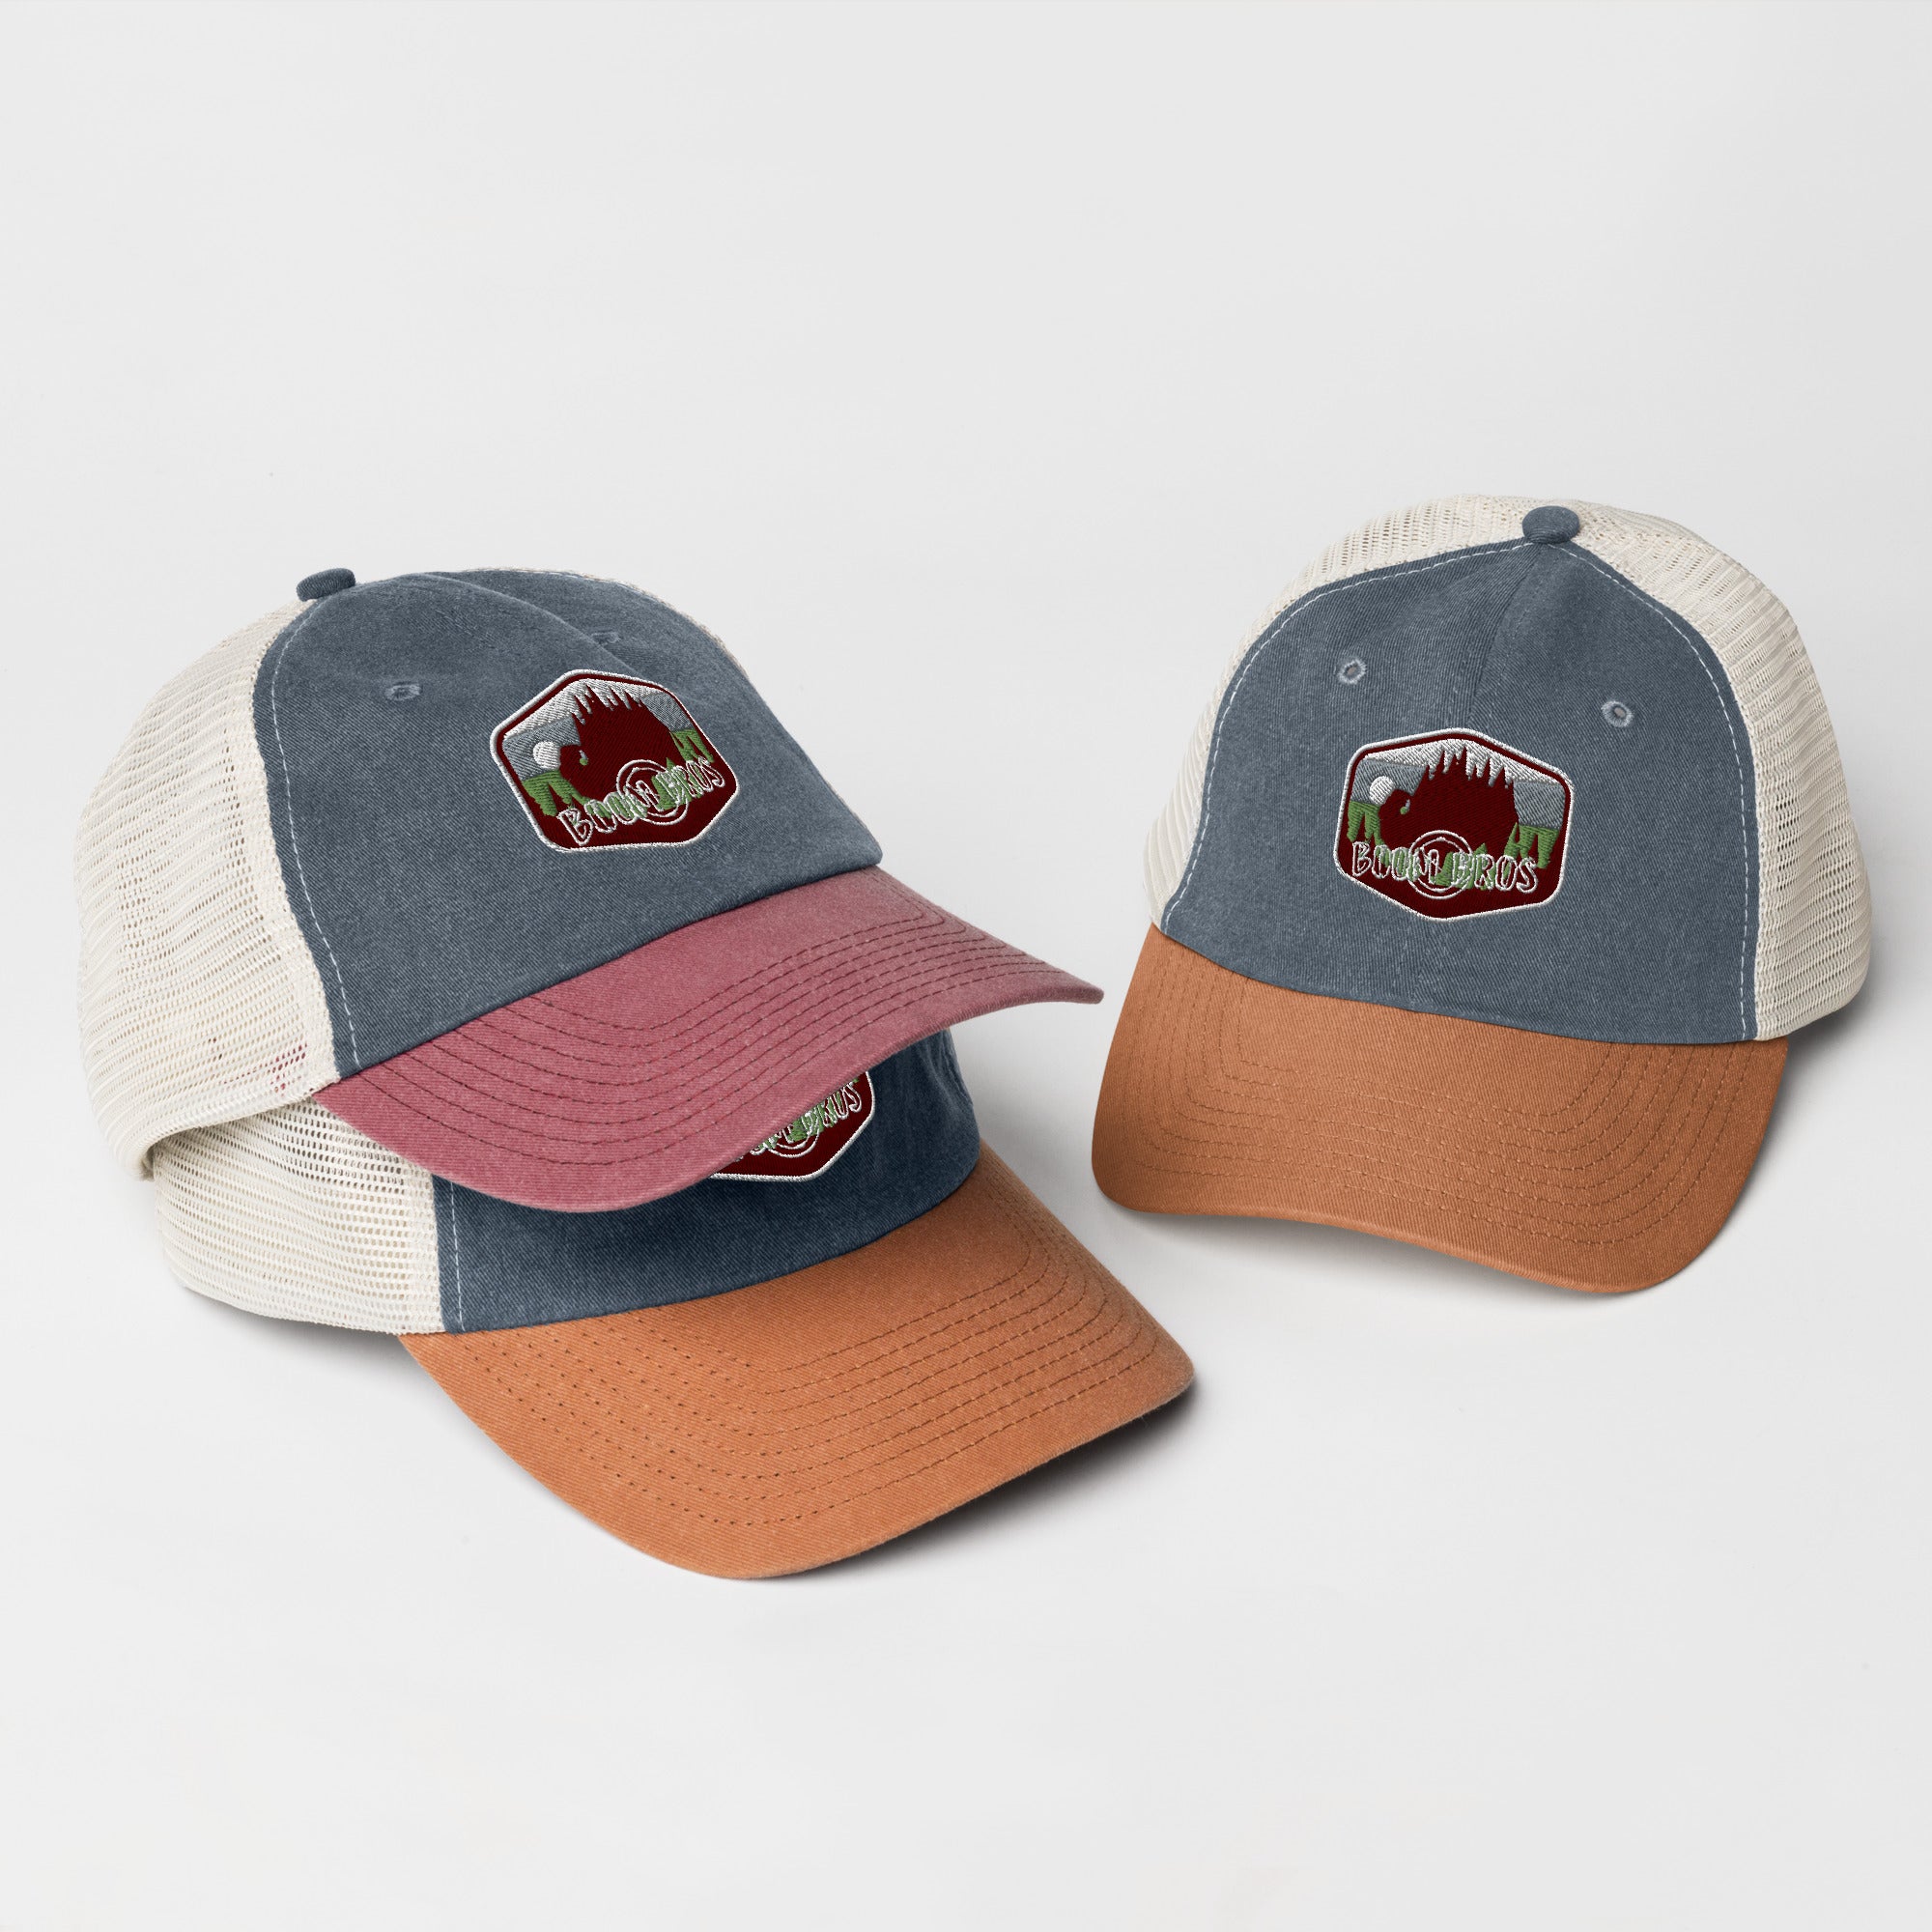 Boom Bros Outdoors Bison Logo Pigment-dyed cap